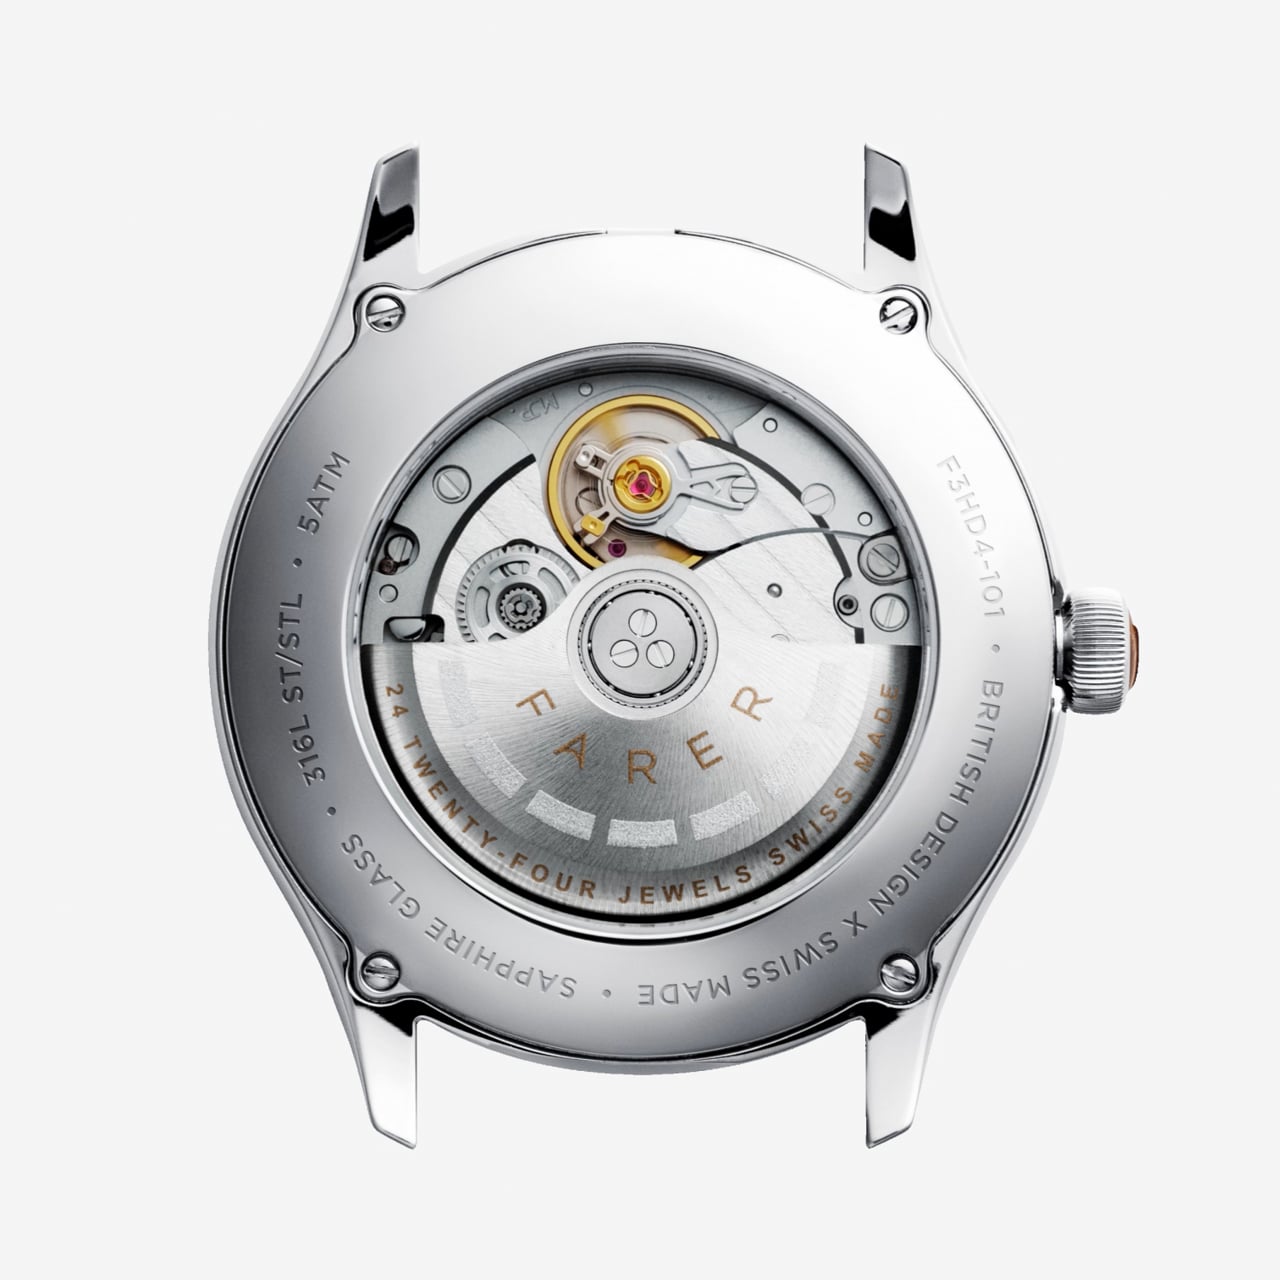 Sweep Seconds Three La G101 - - Joux-Perret Automatic Hand Watches Farer